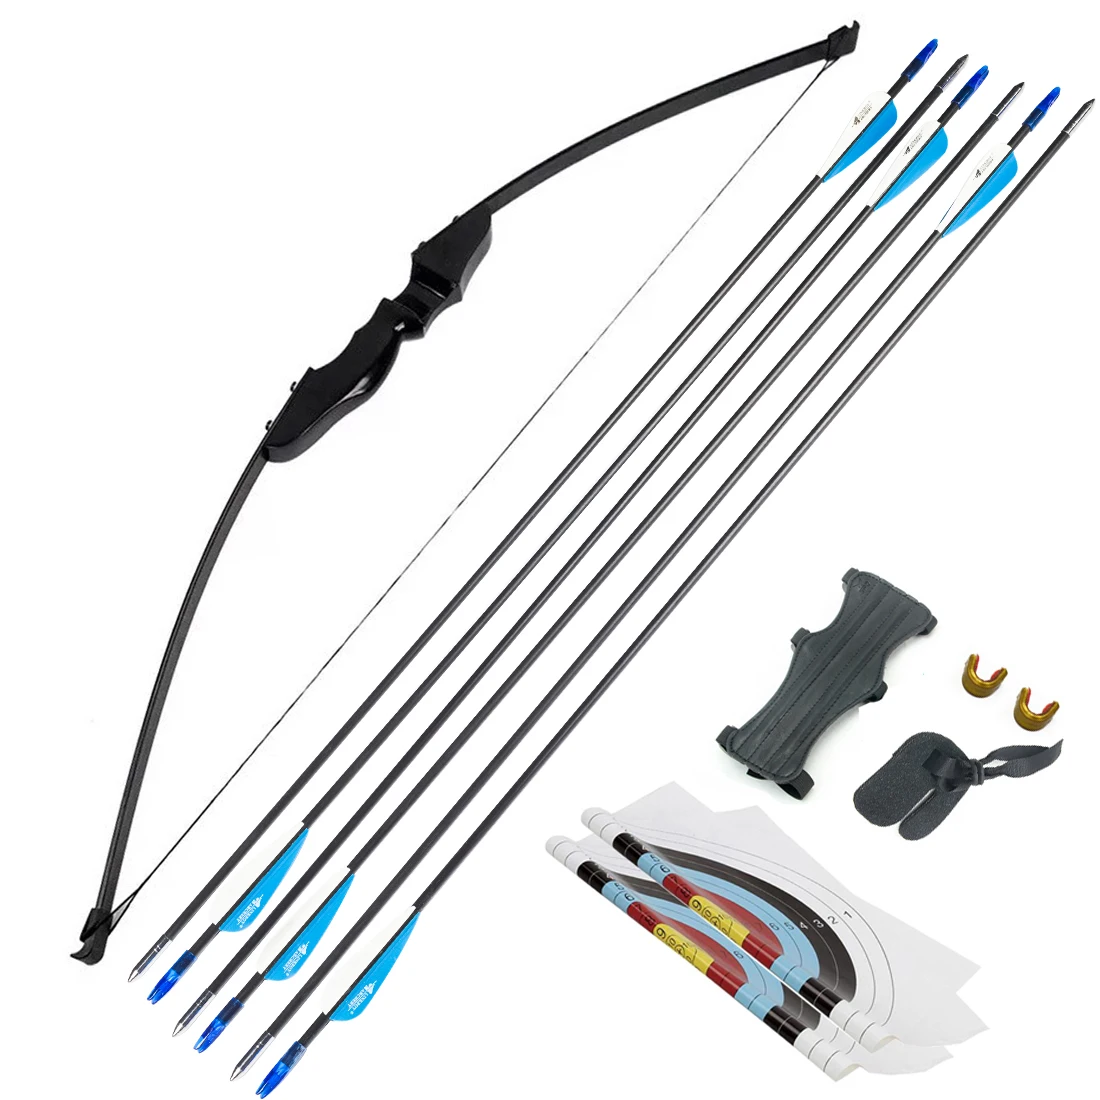 70 Archery Recurve Bow Sets for Adults Takedown Hunting Target Beginner Practice 